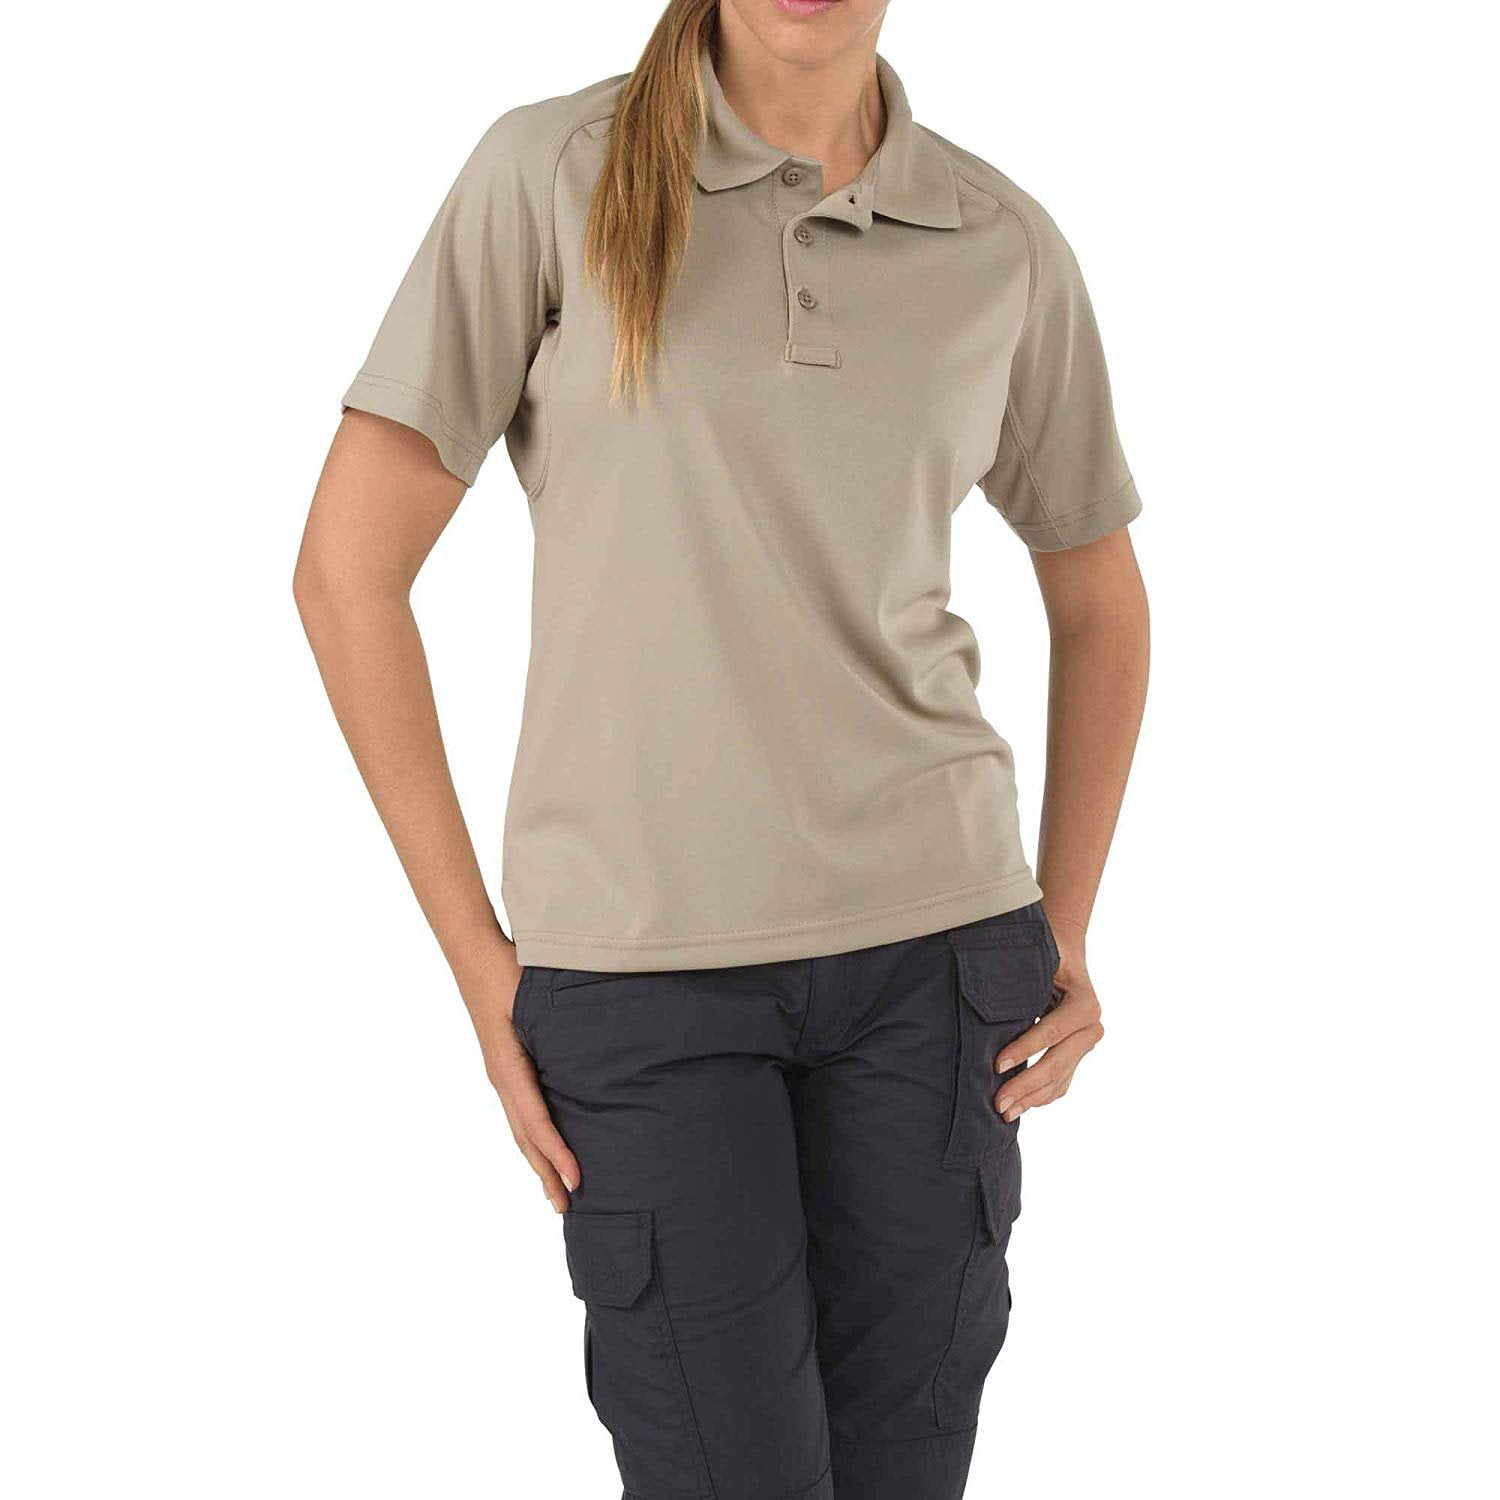 Dark Navy, Large 5.11 Tactical Series 61165 Womens Performance Polo Shirt